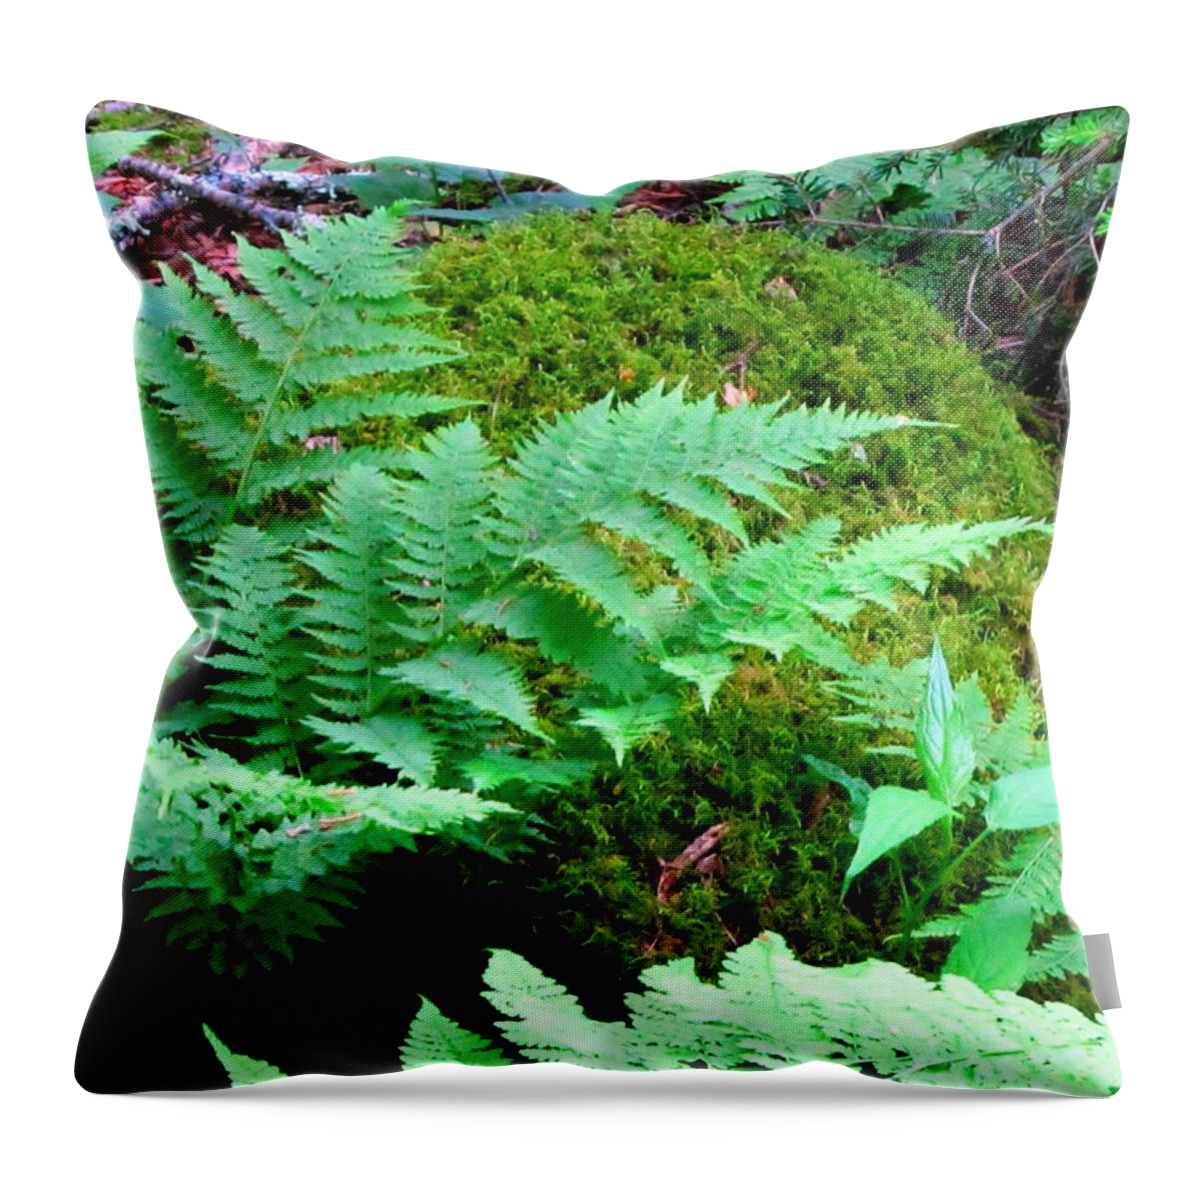 Fern Throw Pillow featuring the photograph Fern and Moss by Cynthia Clark